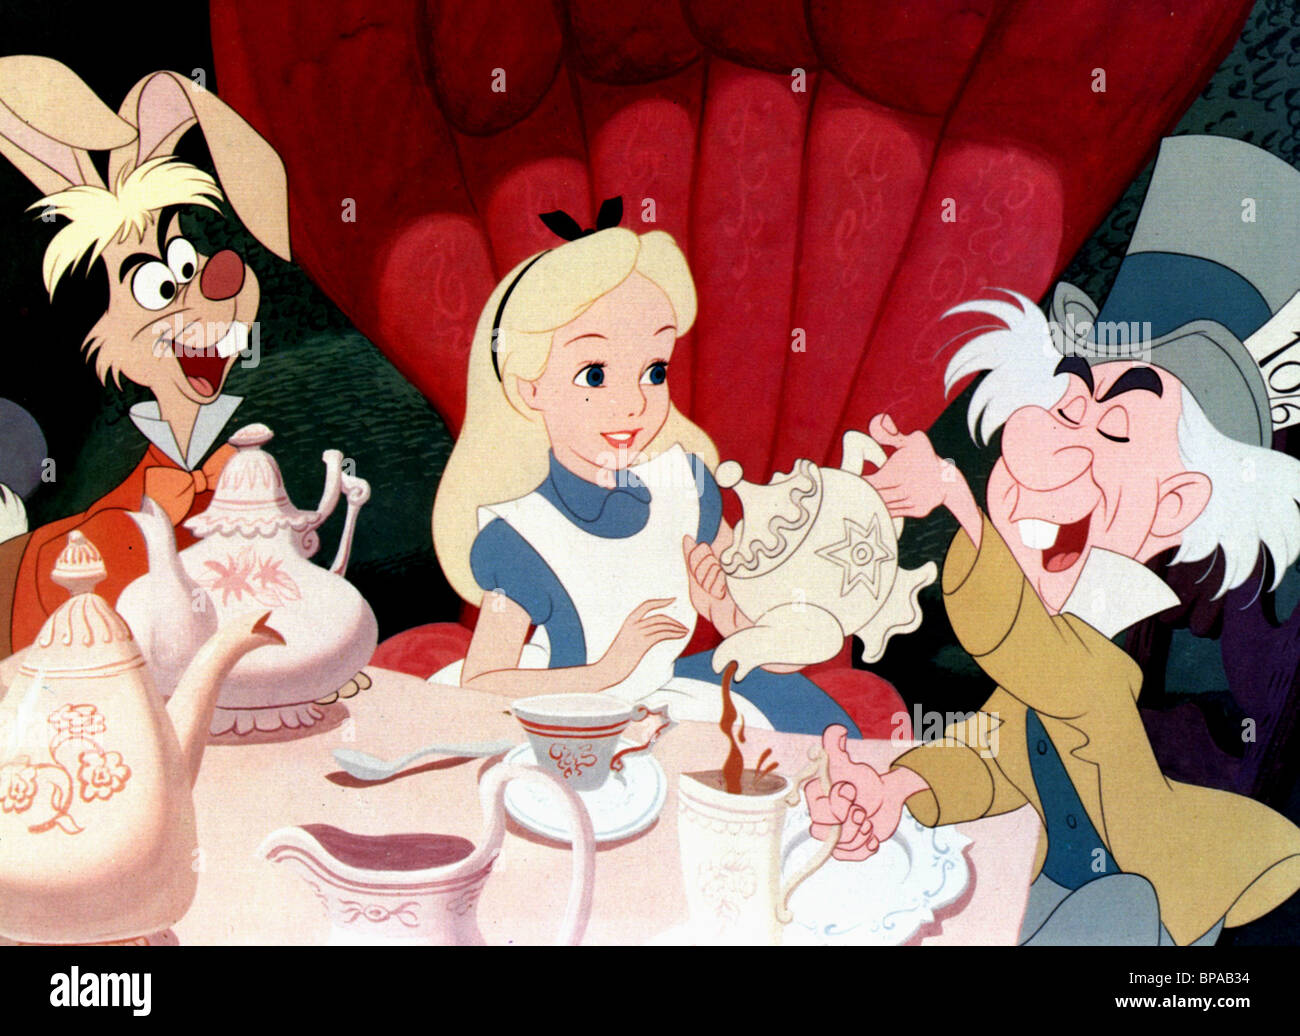 MARCH HARE, ALICE, MAD HATTER, ALICE IN WONDERLAND, 1951 Stock Photo